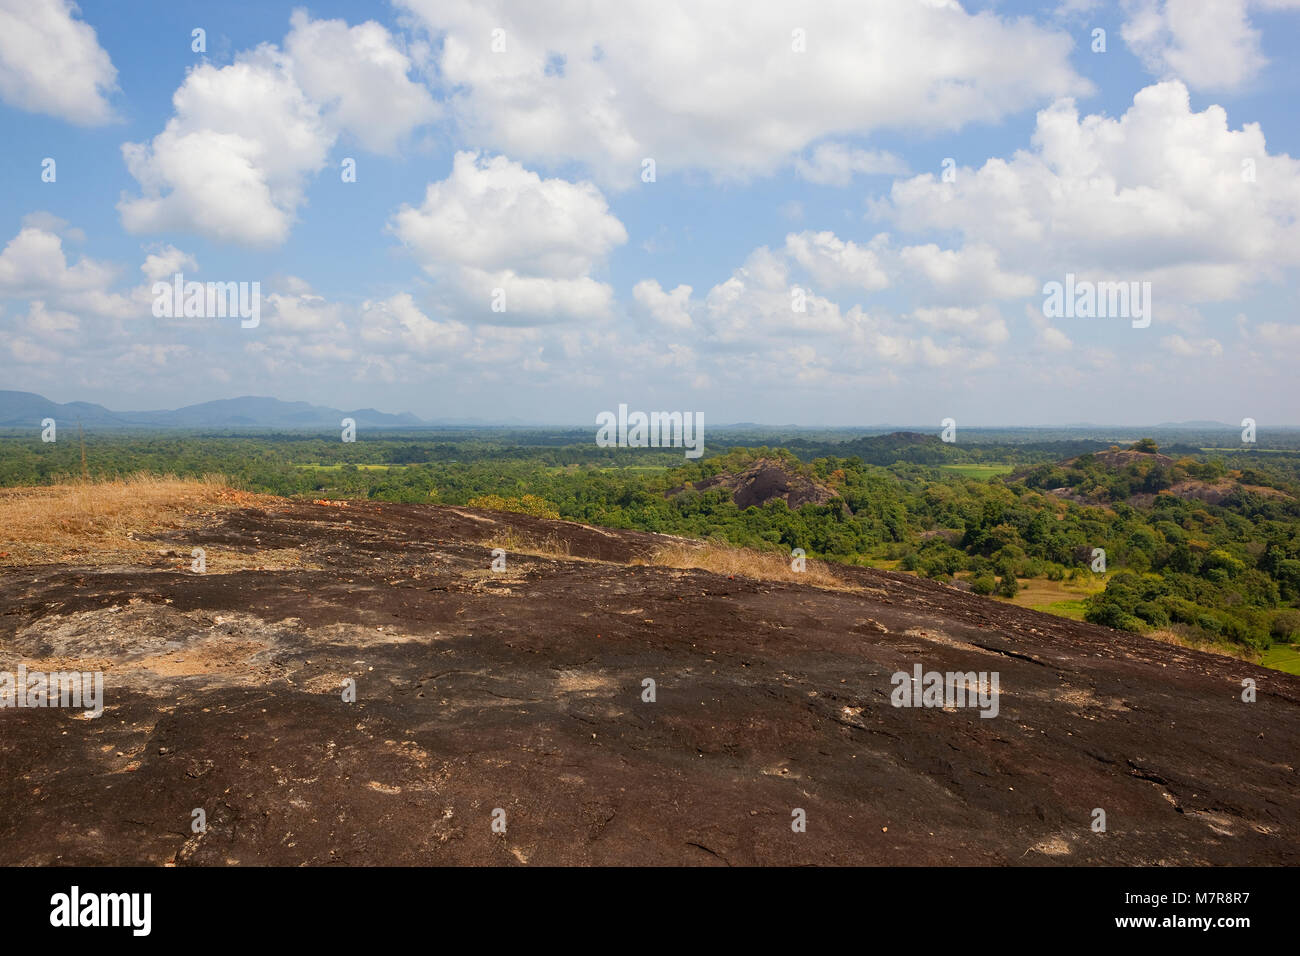 volcanic rock overlooking a sri lankan scenic vista with woodland and mountains under a blue sky with fluffy white clouds Stock Photo